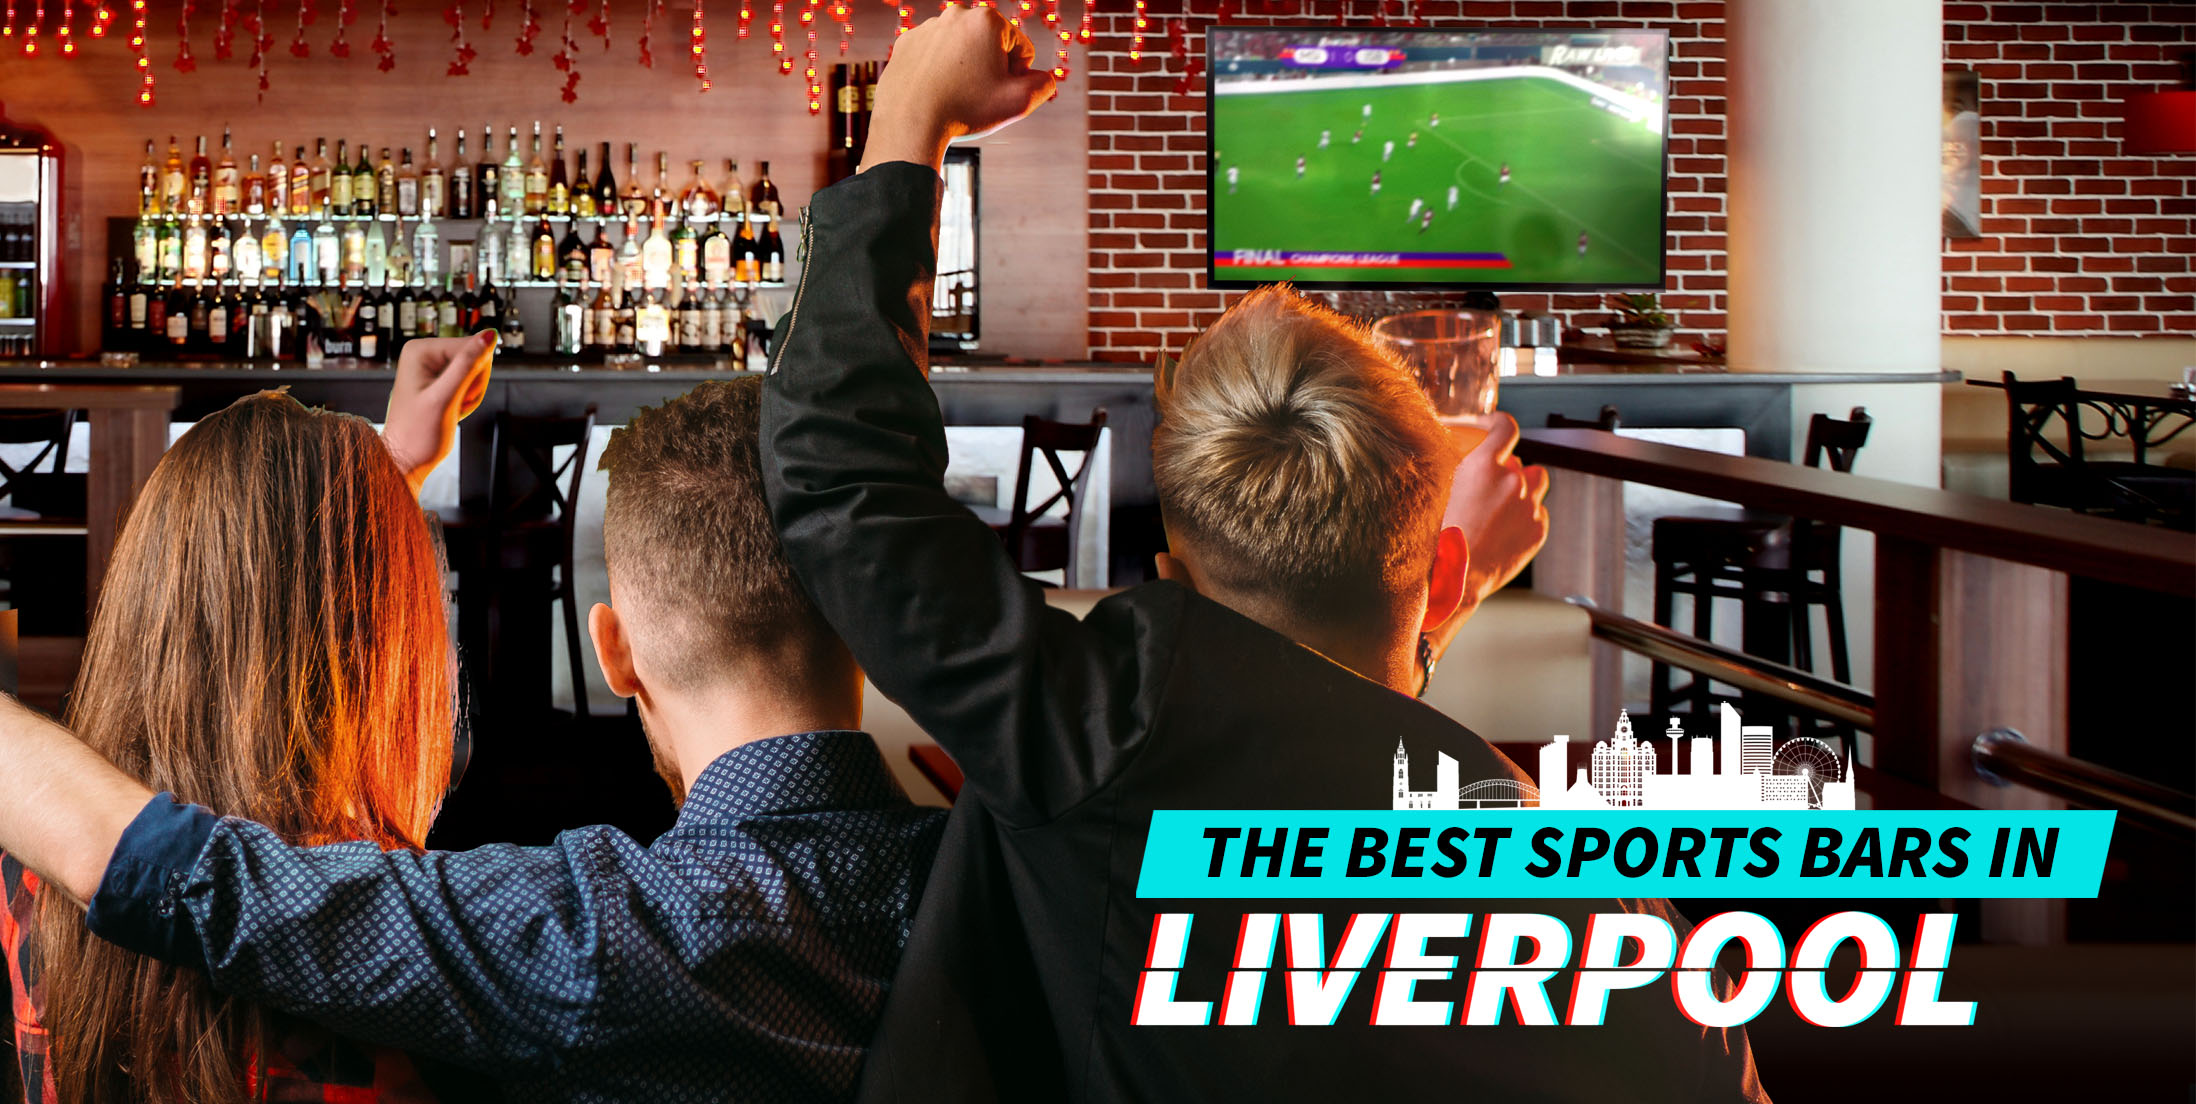 The Best Sports Bars in Liverpool